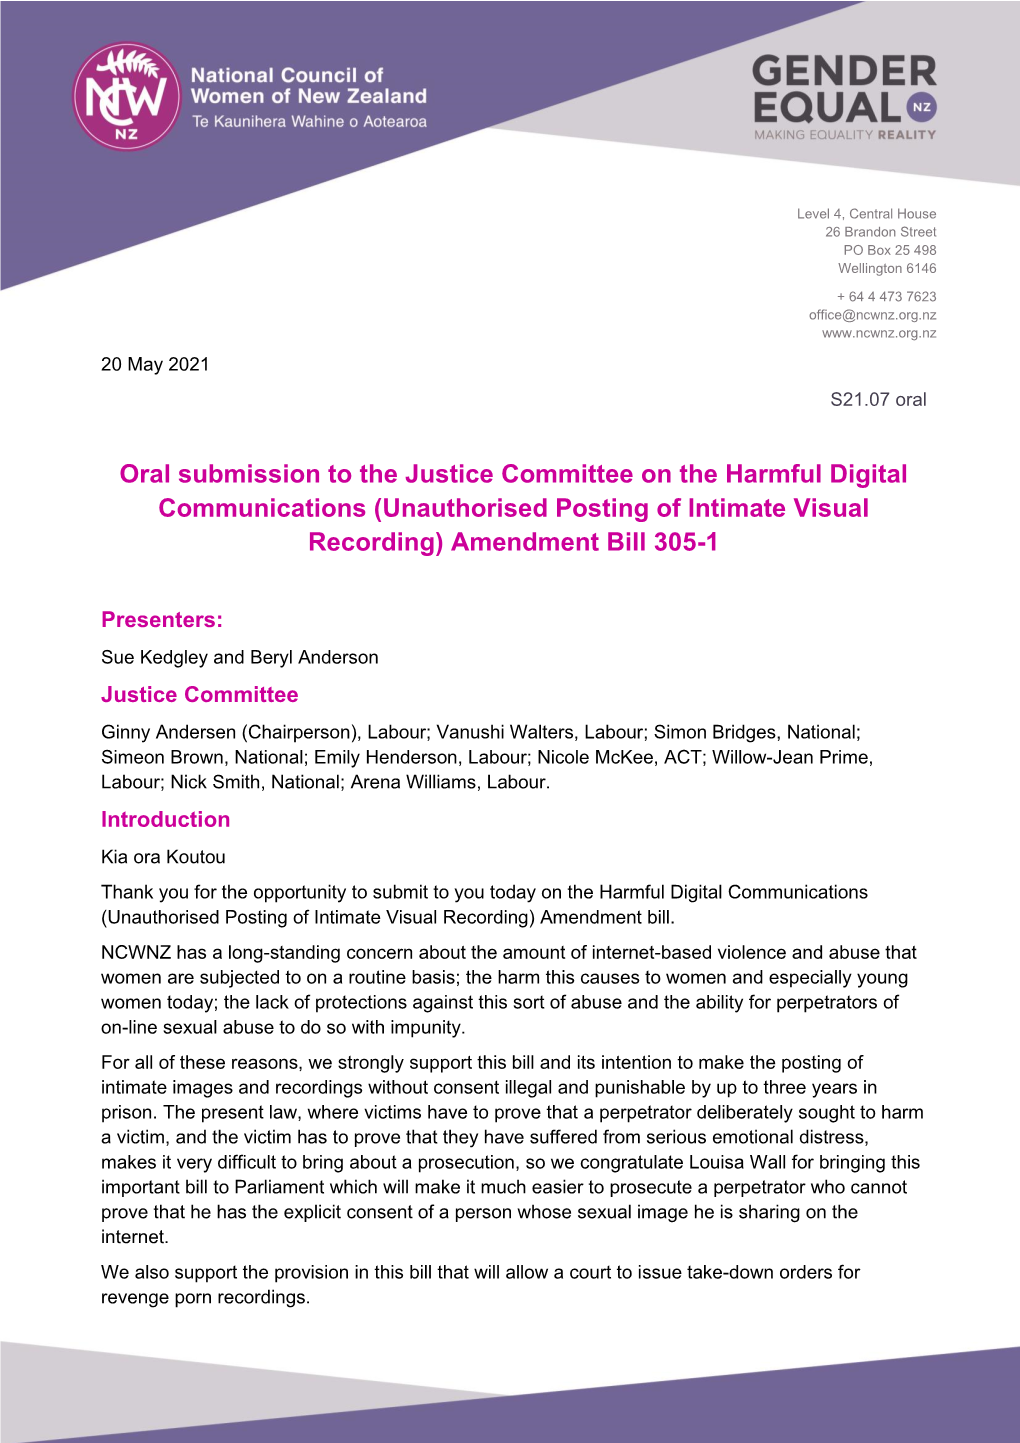 Oral Submission to the Justice Committee on the Harmful Digital Communications (Unauthorised Posting of Intimate Visual Recording) Amendment Bill 305-1